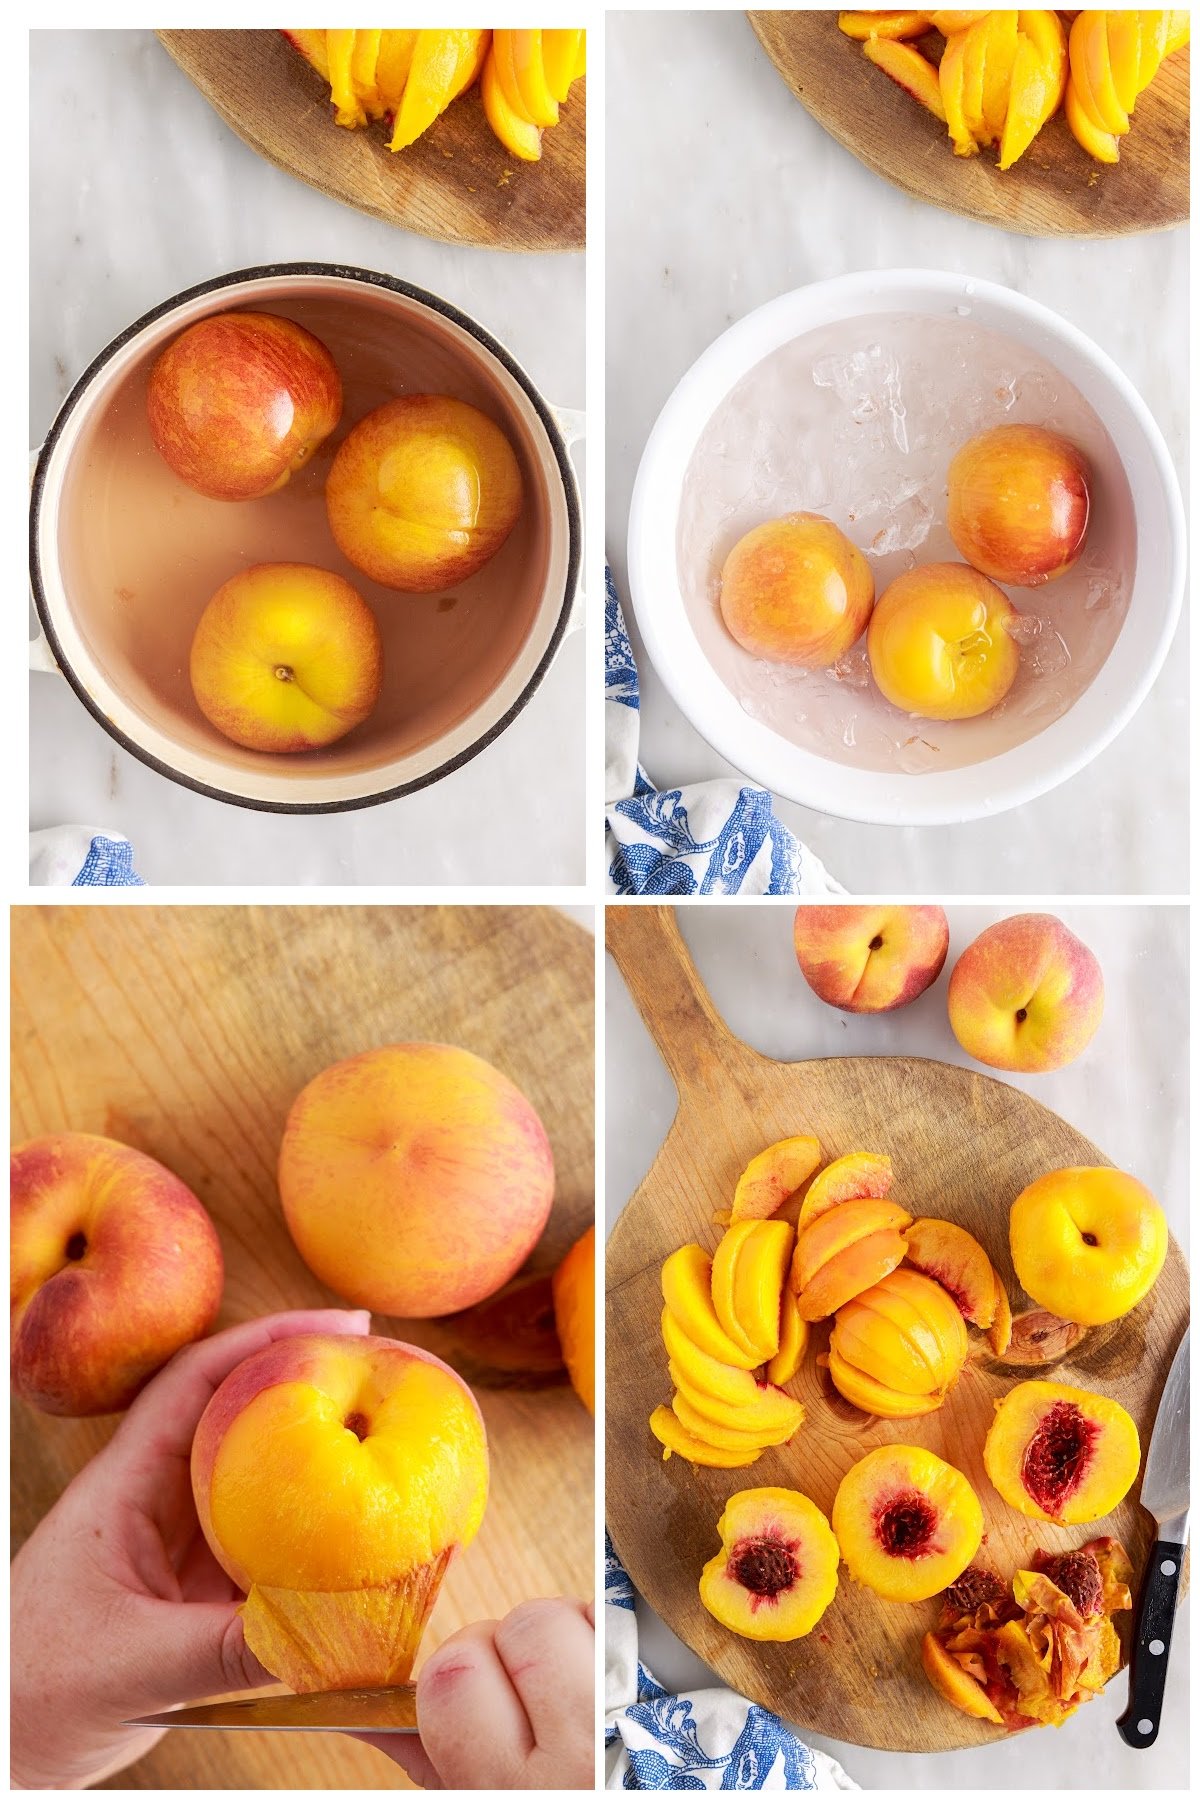 Four step shown there to blanch the peaches.